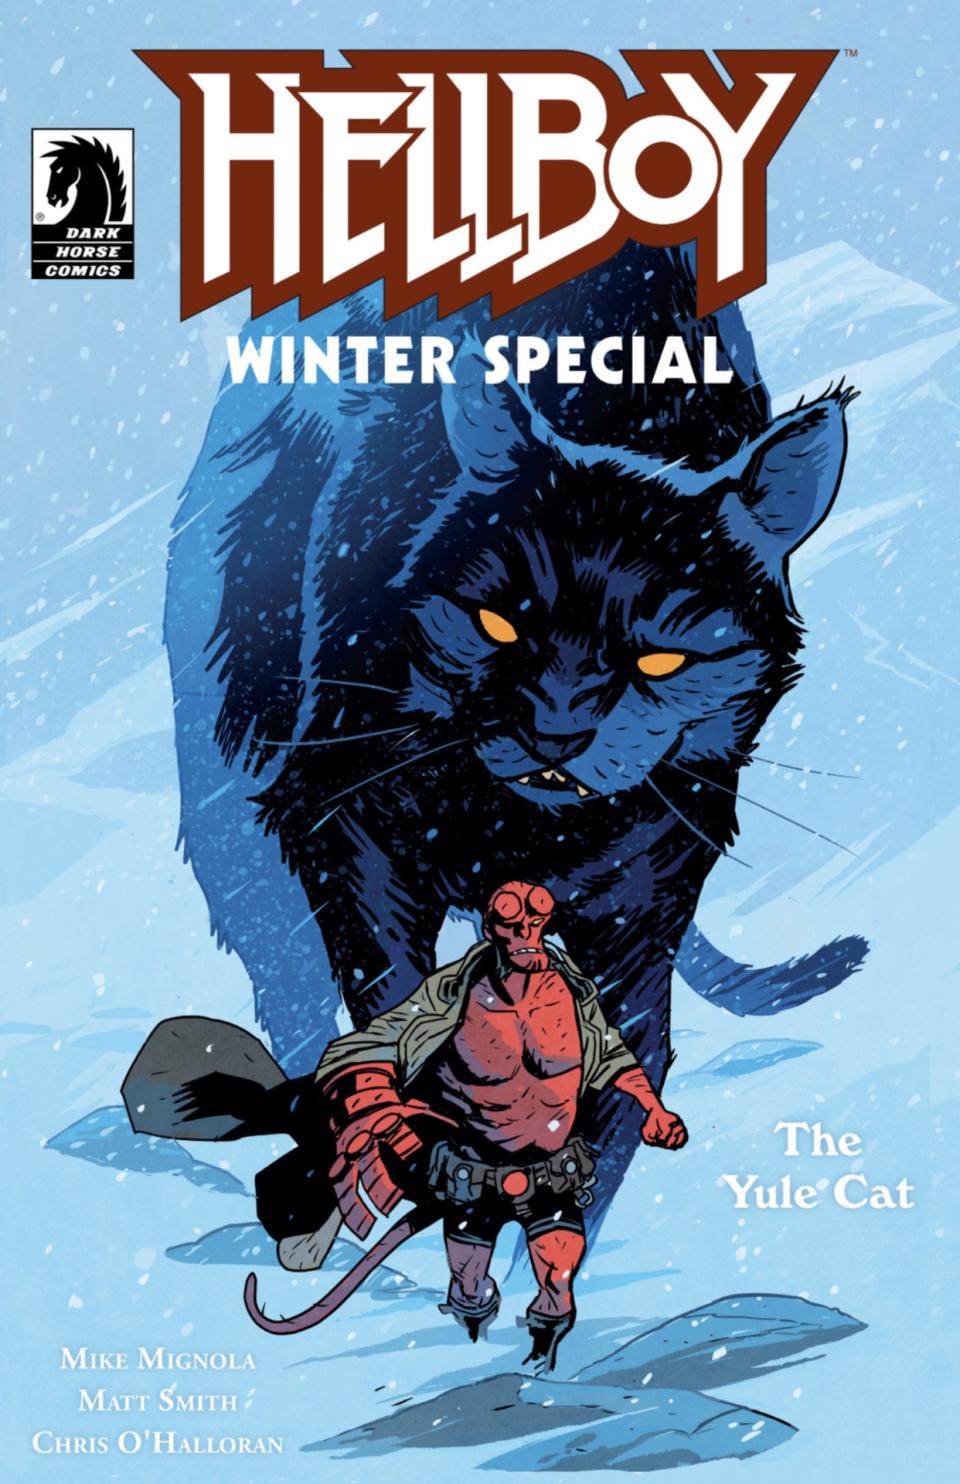 Hellboy Winter Special: The Yule Cat cover art